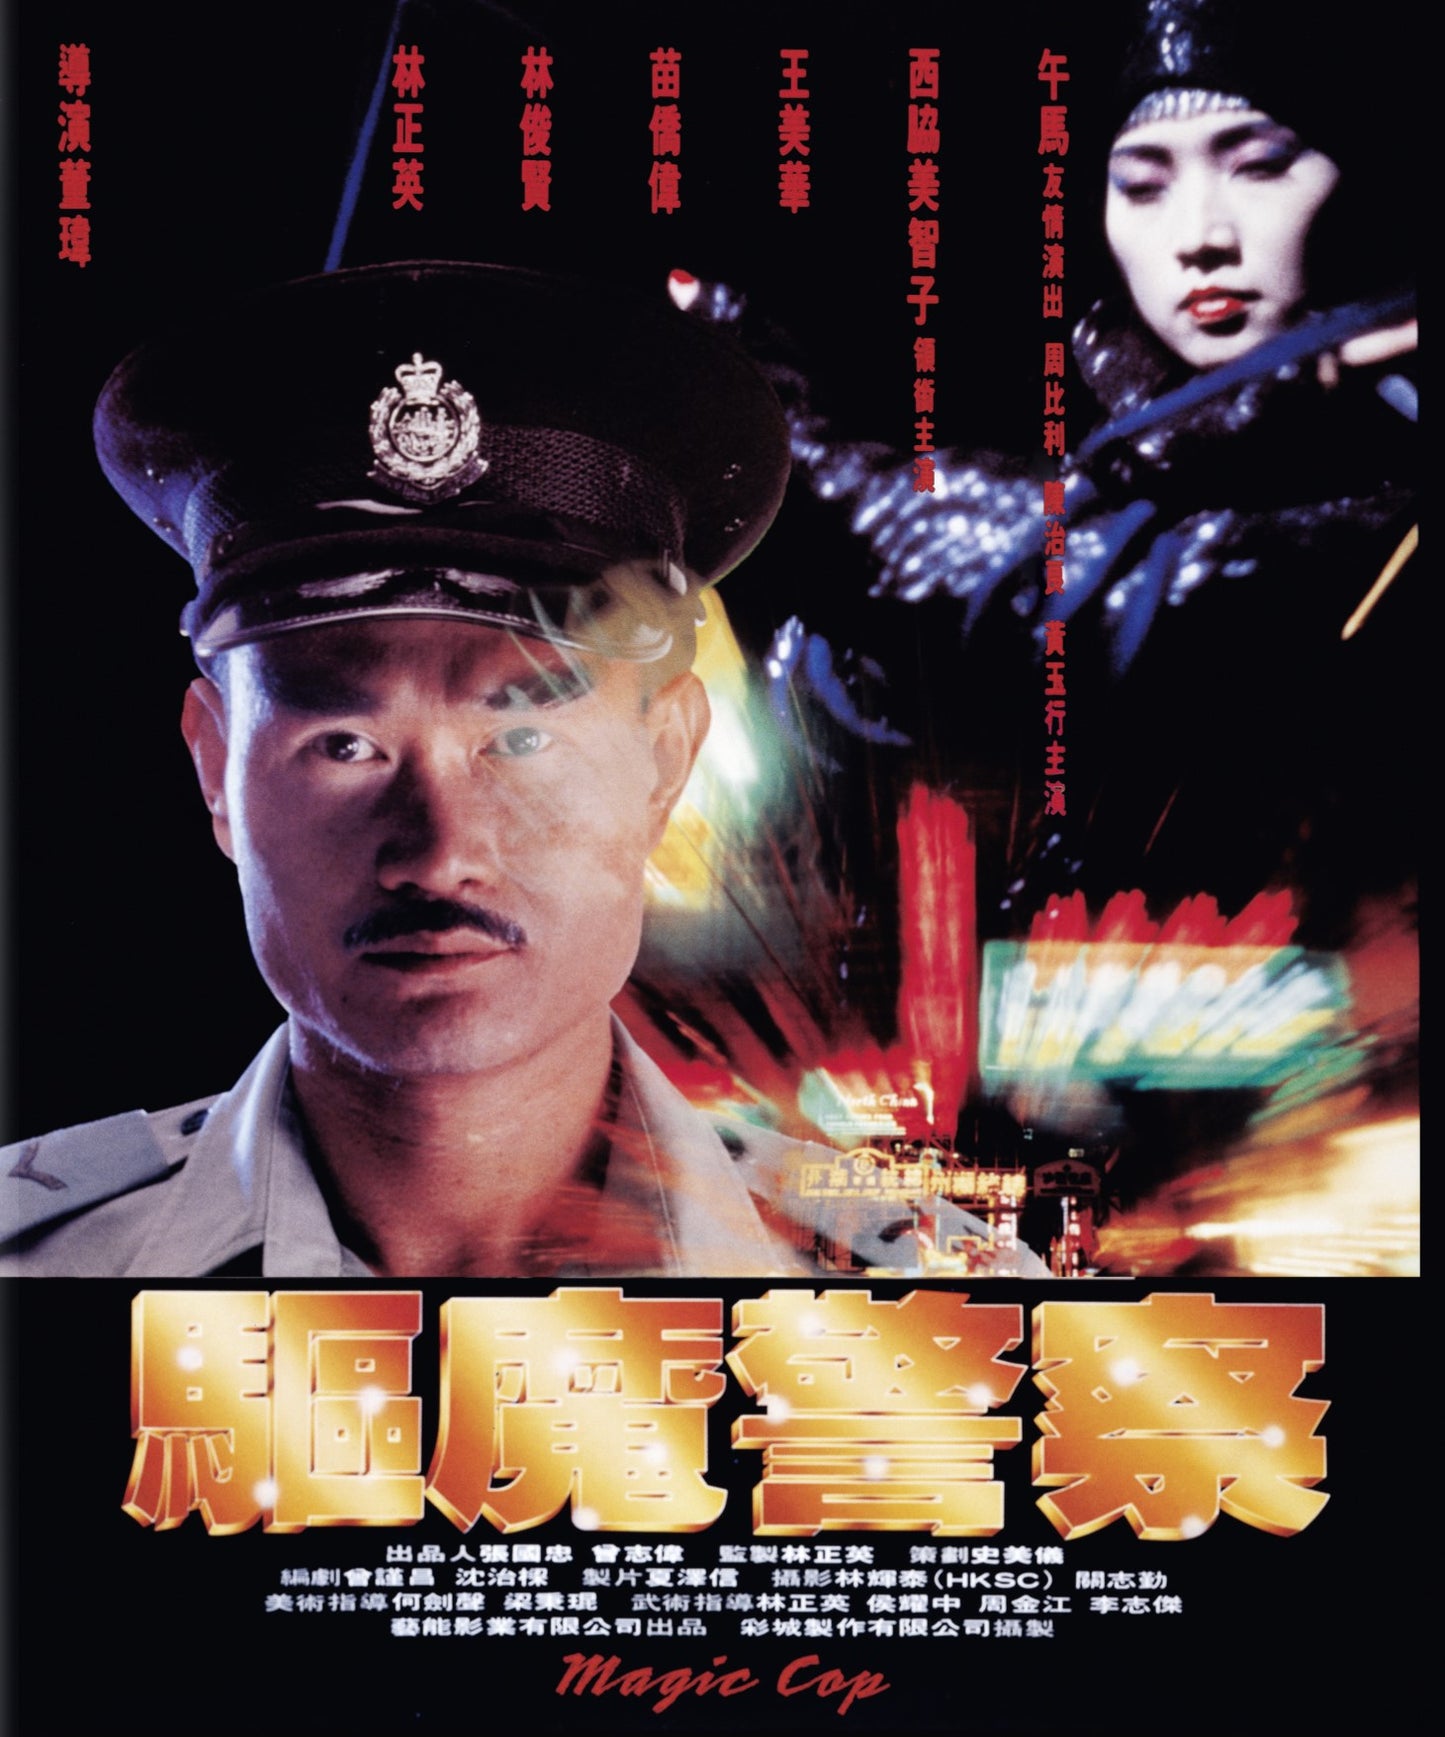 Magic Cop Limited Edition 88 Films Blu-Ray [NEW] [SLIPCOVER]